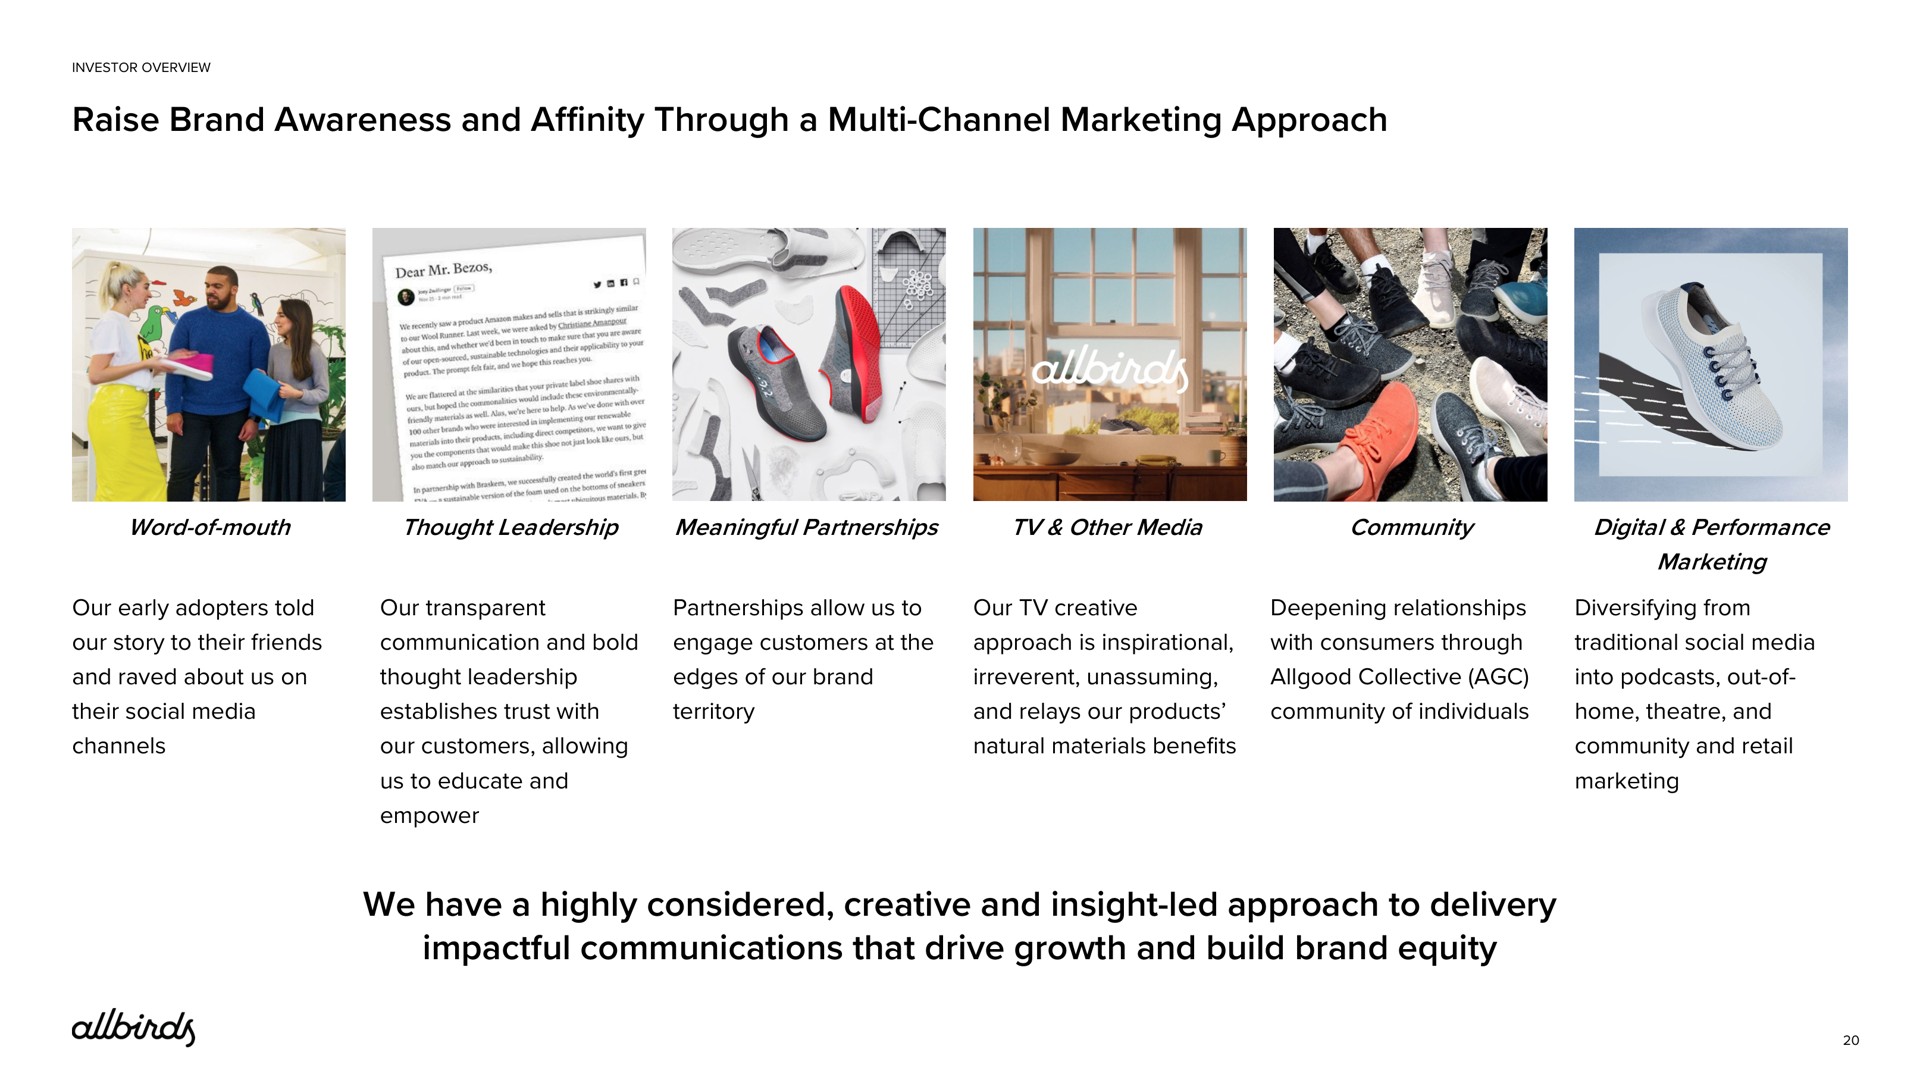 raise brand awareness and affinity through a channel marketing approach we have a highly considered creative and insight led approach to delivery communications that drive growth and build brand equity | Allbirds